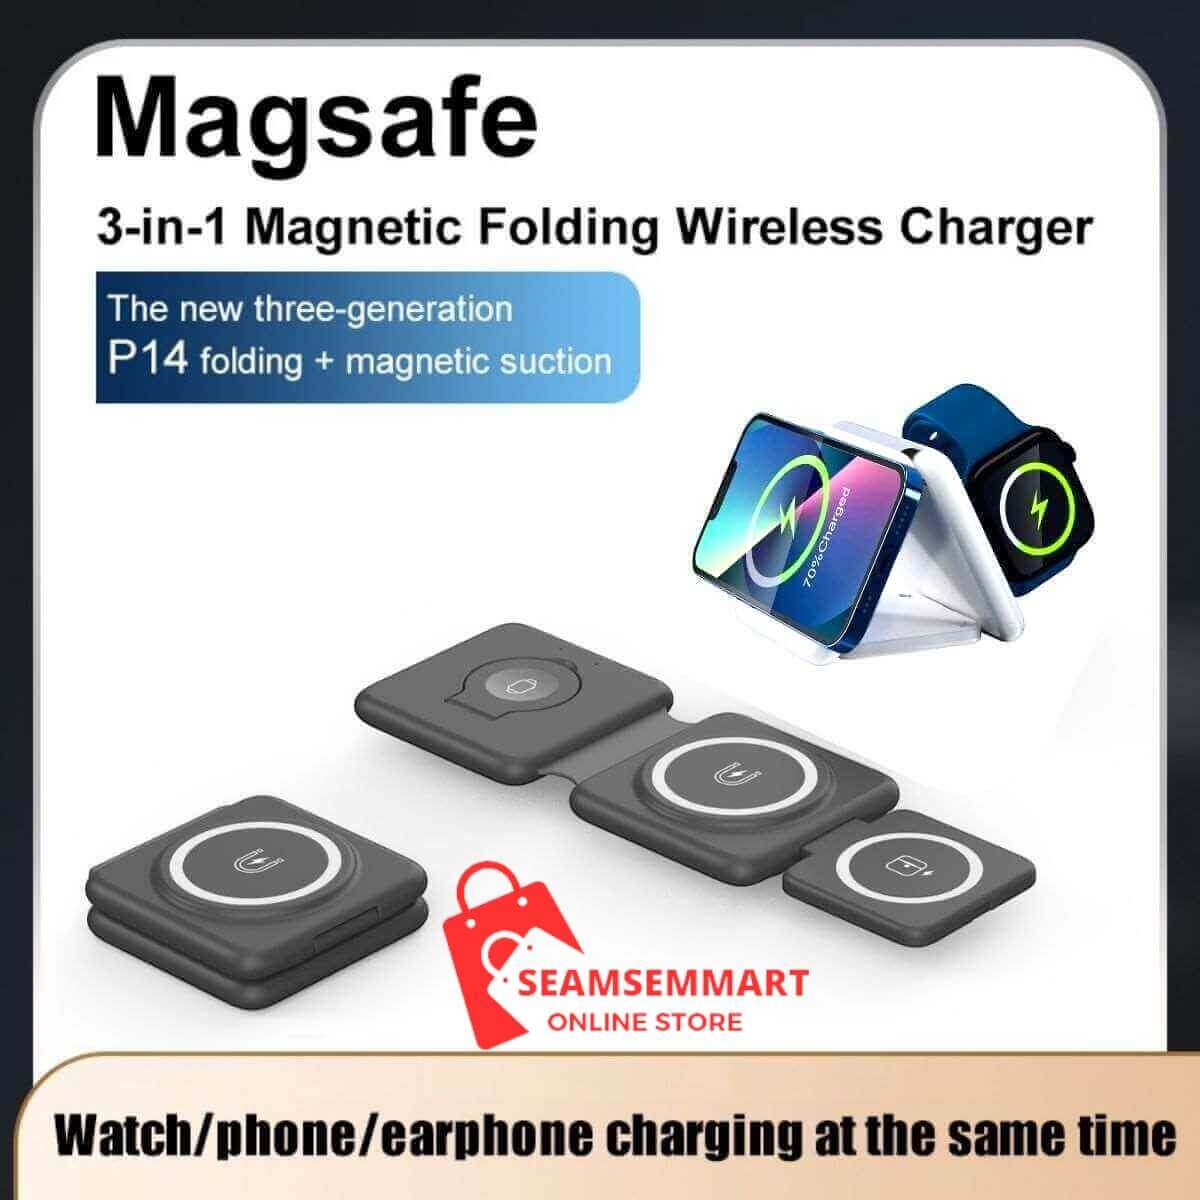 Foldable 3-in-1 Magnetic Wireless Charger